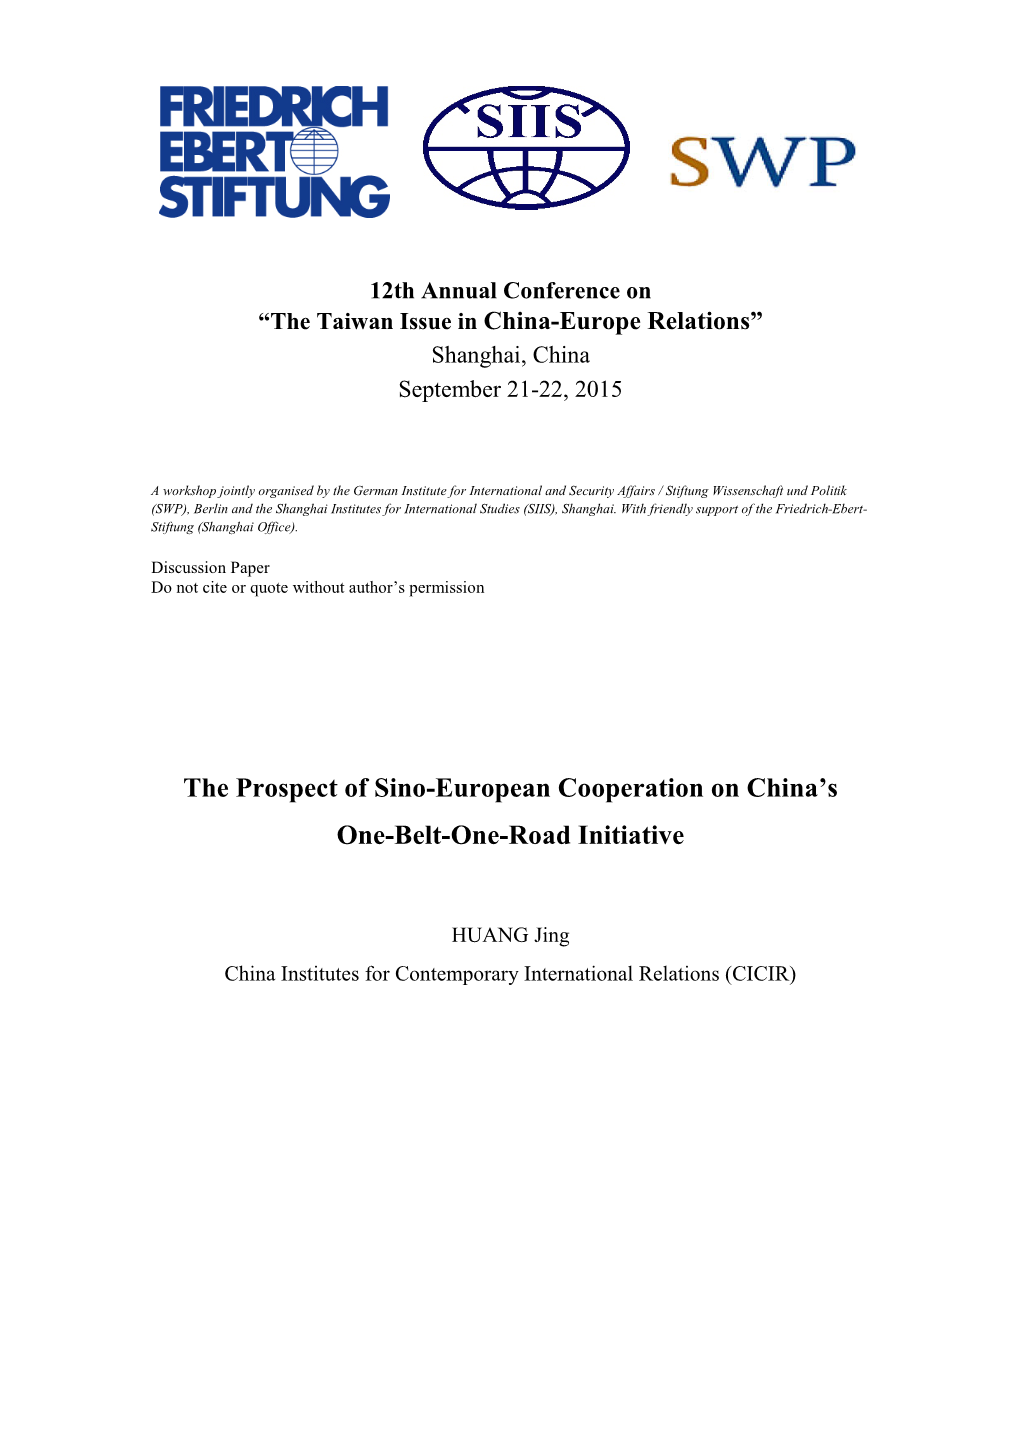 The Prospect of Sino-European Cooperation on China's One-Belt